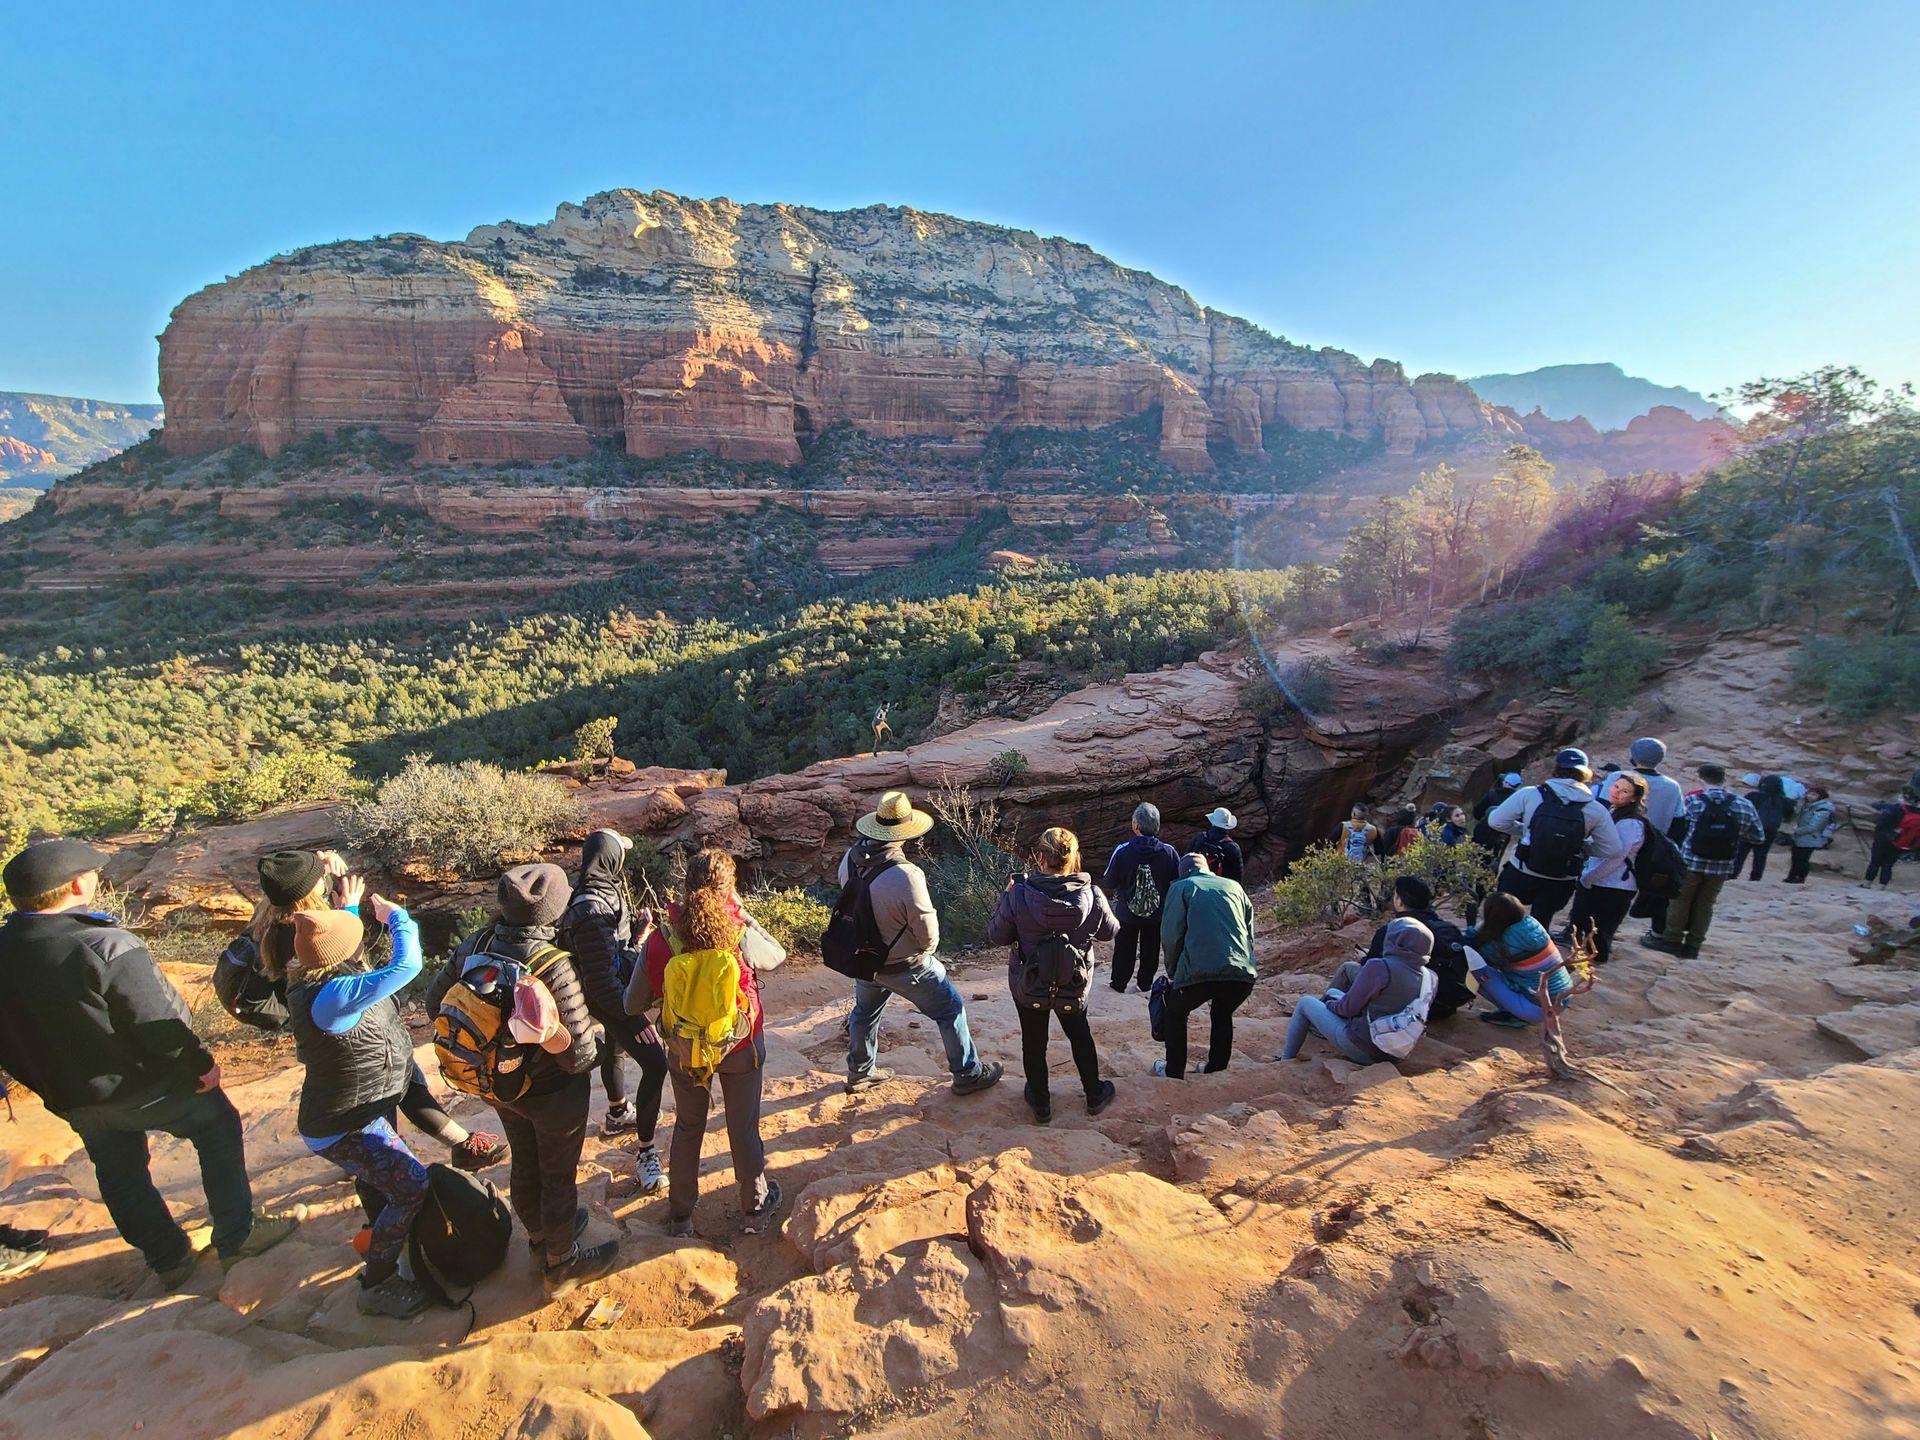 A line of at least 20 people waiting to take a photo on Devil's Bridge.